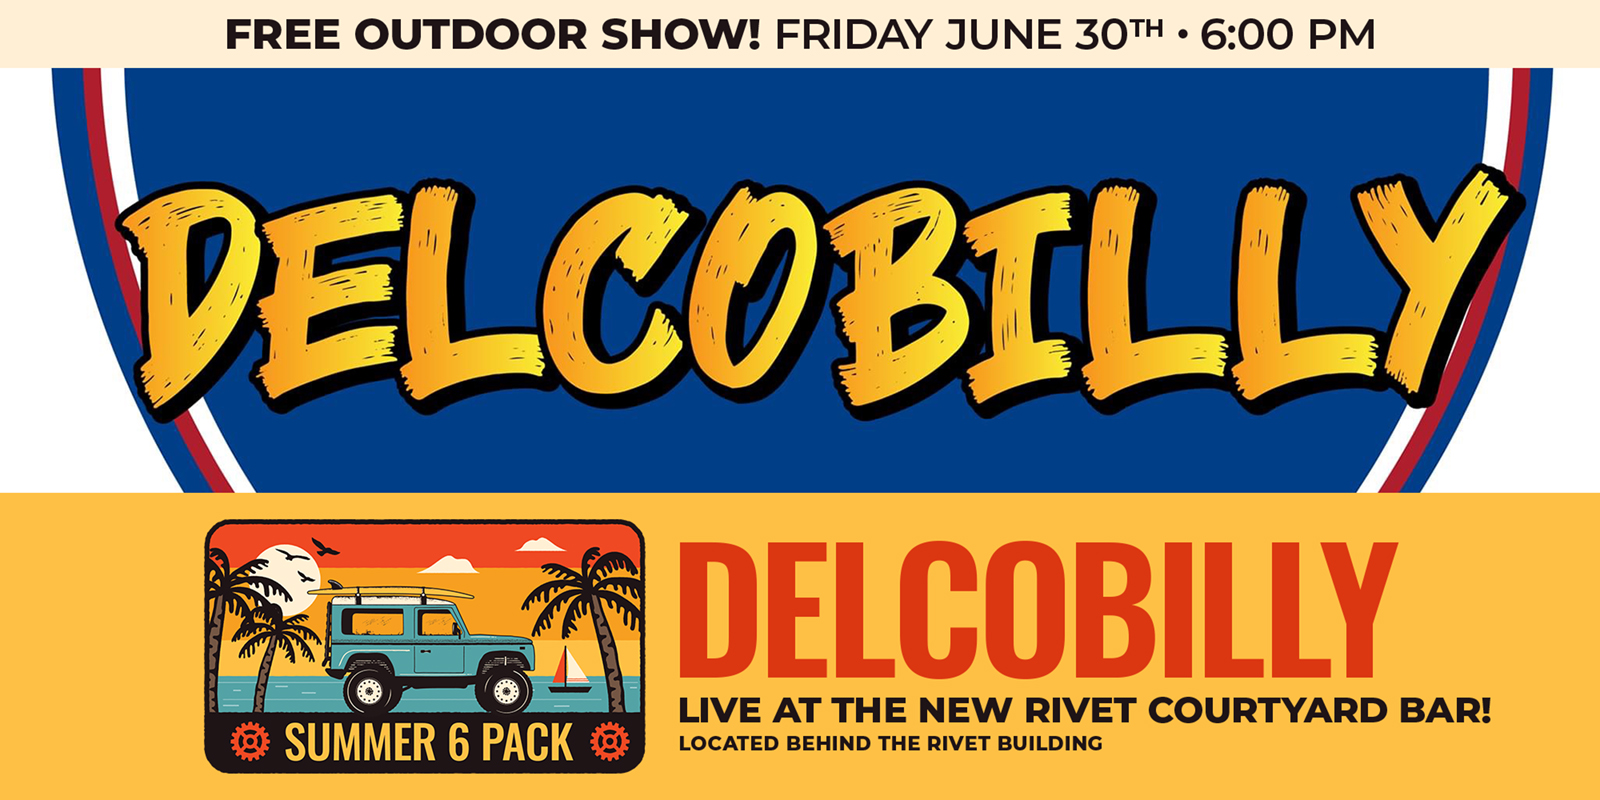 The Summer 6 Pack Free Outdoor Series continues at Rivet: Canteen & Assembly with DELCOBILLY on Friday, June 30th, 2023. Join us!